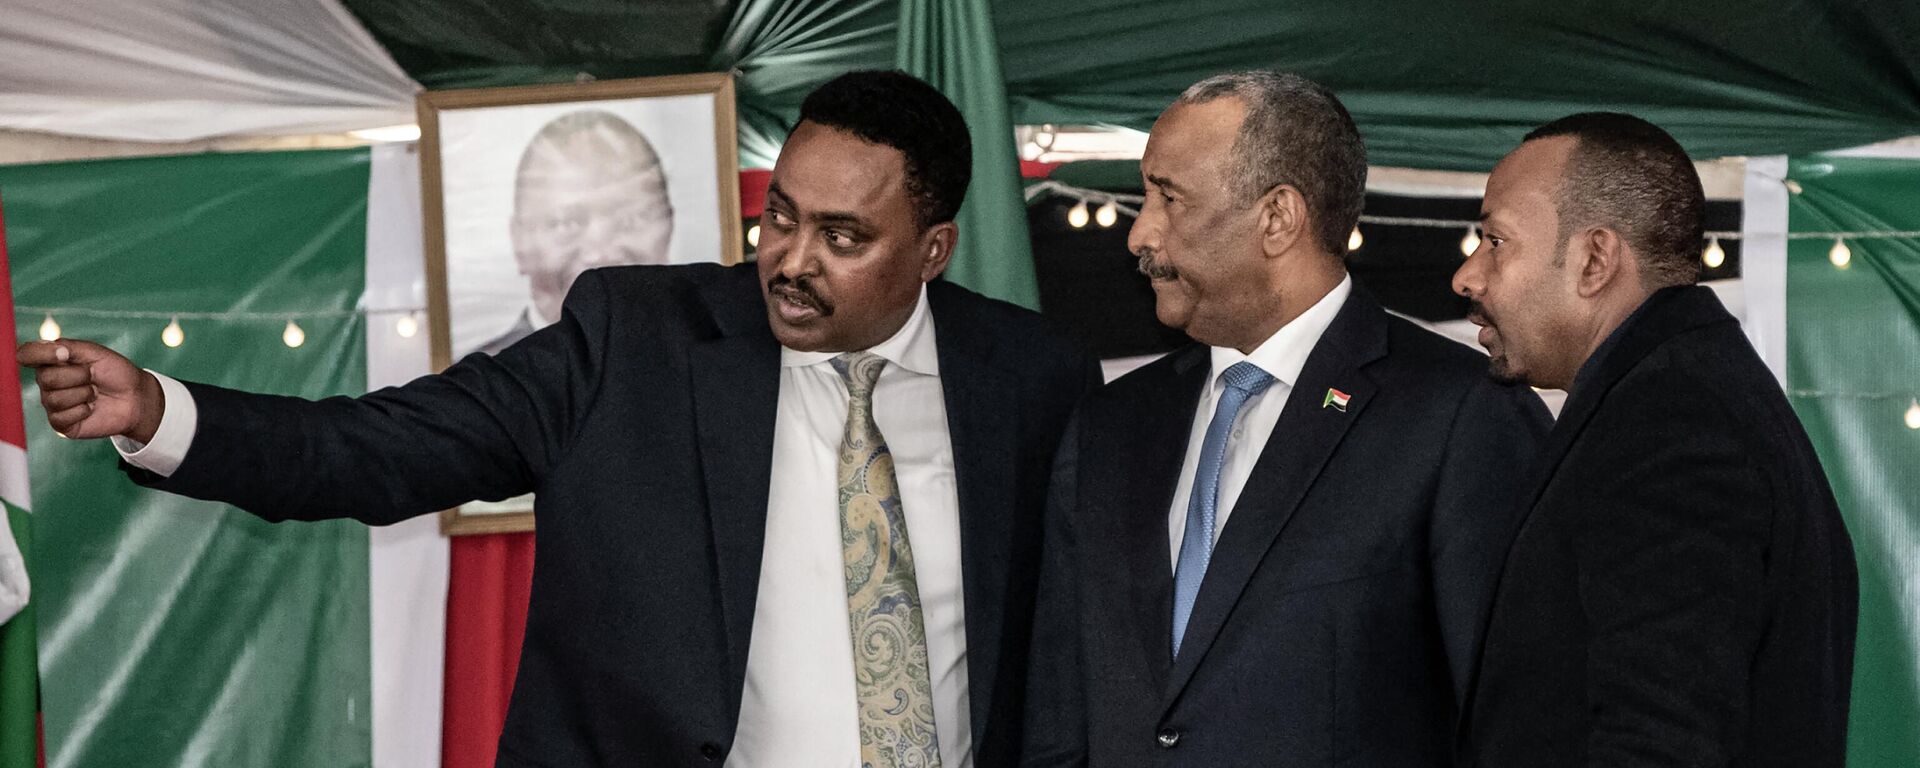 Executive Secretary of the Inter-Governmental Authority on Development (IGAD) and Ethiopia's Former Minister of Foreign Affairs Workneh Gebeyahu (L) gestures next to Sudan's President of the Transitional Sovereignty Council Abdel Fattah al-Burhan (C) and Ethiopia President Abiy Ahmed (R) during the 39th IGAD extraordinary summit in Nairobi on July 5, 2022. - Sputnik International, 1920, 17.02.2023